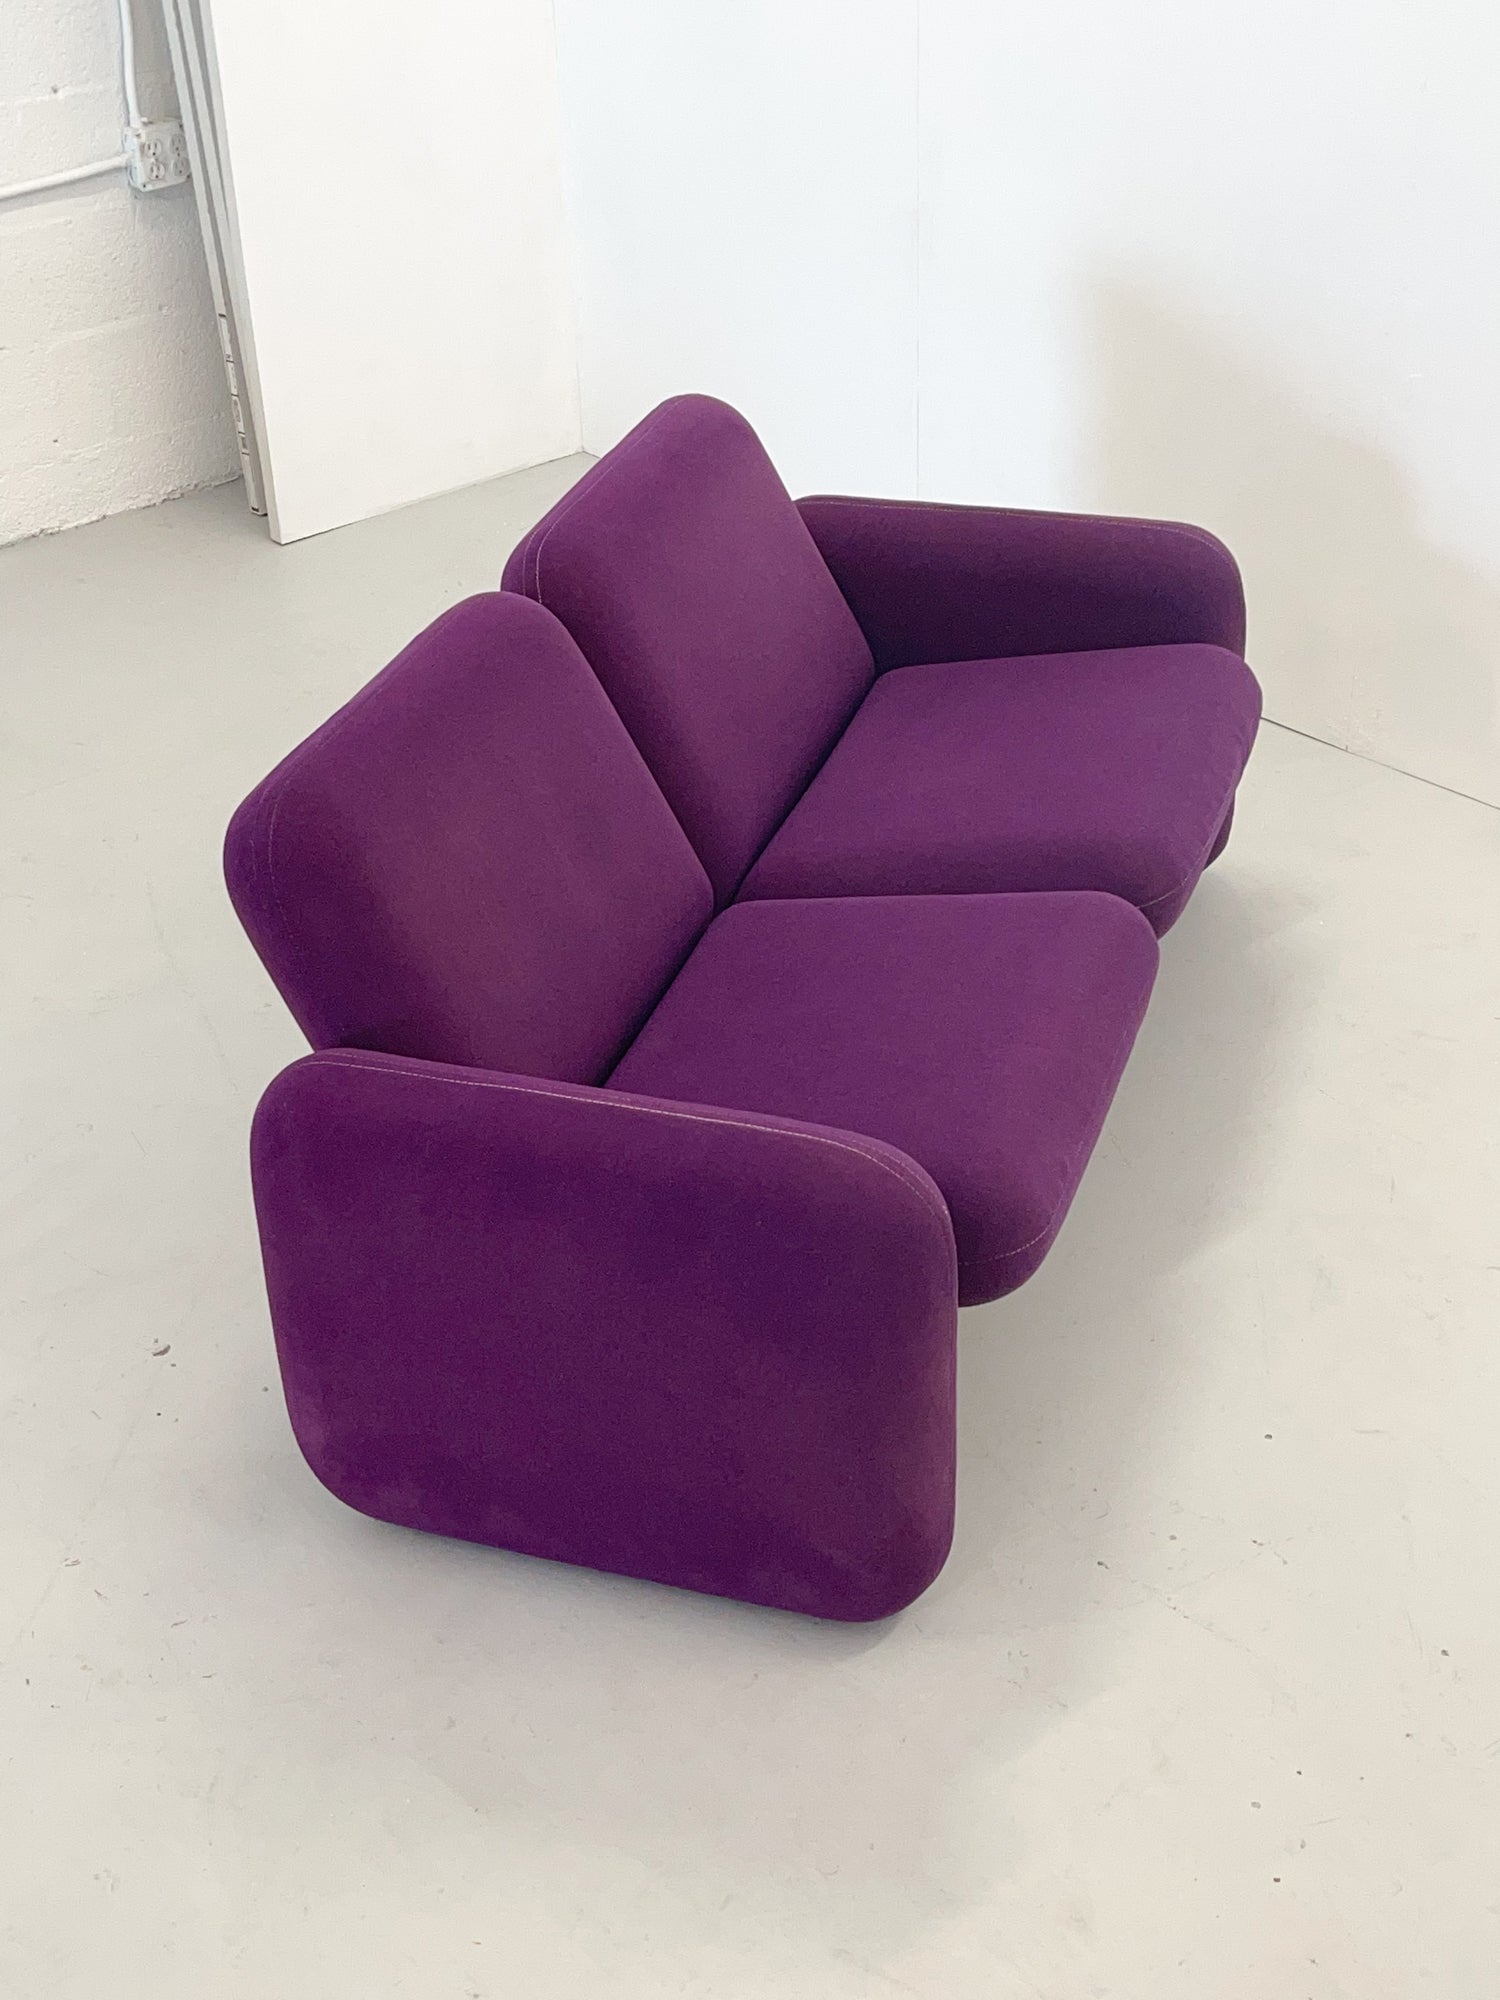 1970s 2-Seater Purple Chiclet Sofa by Ray Wilkes for Herman Miller